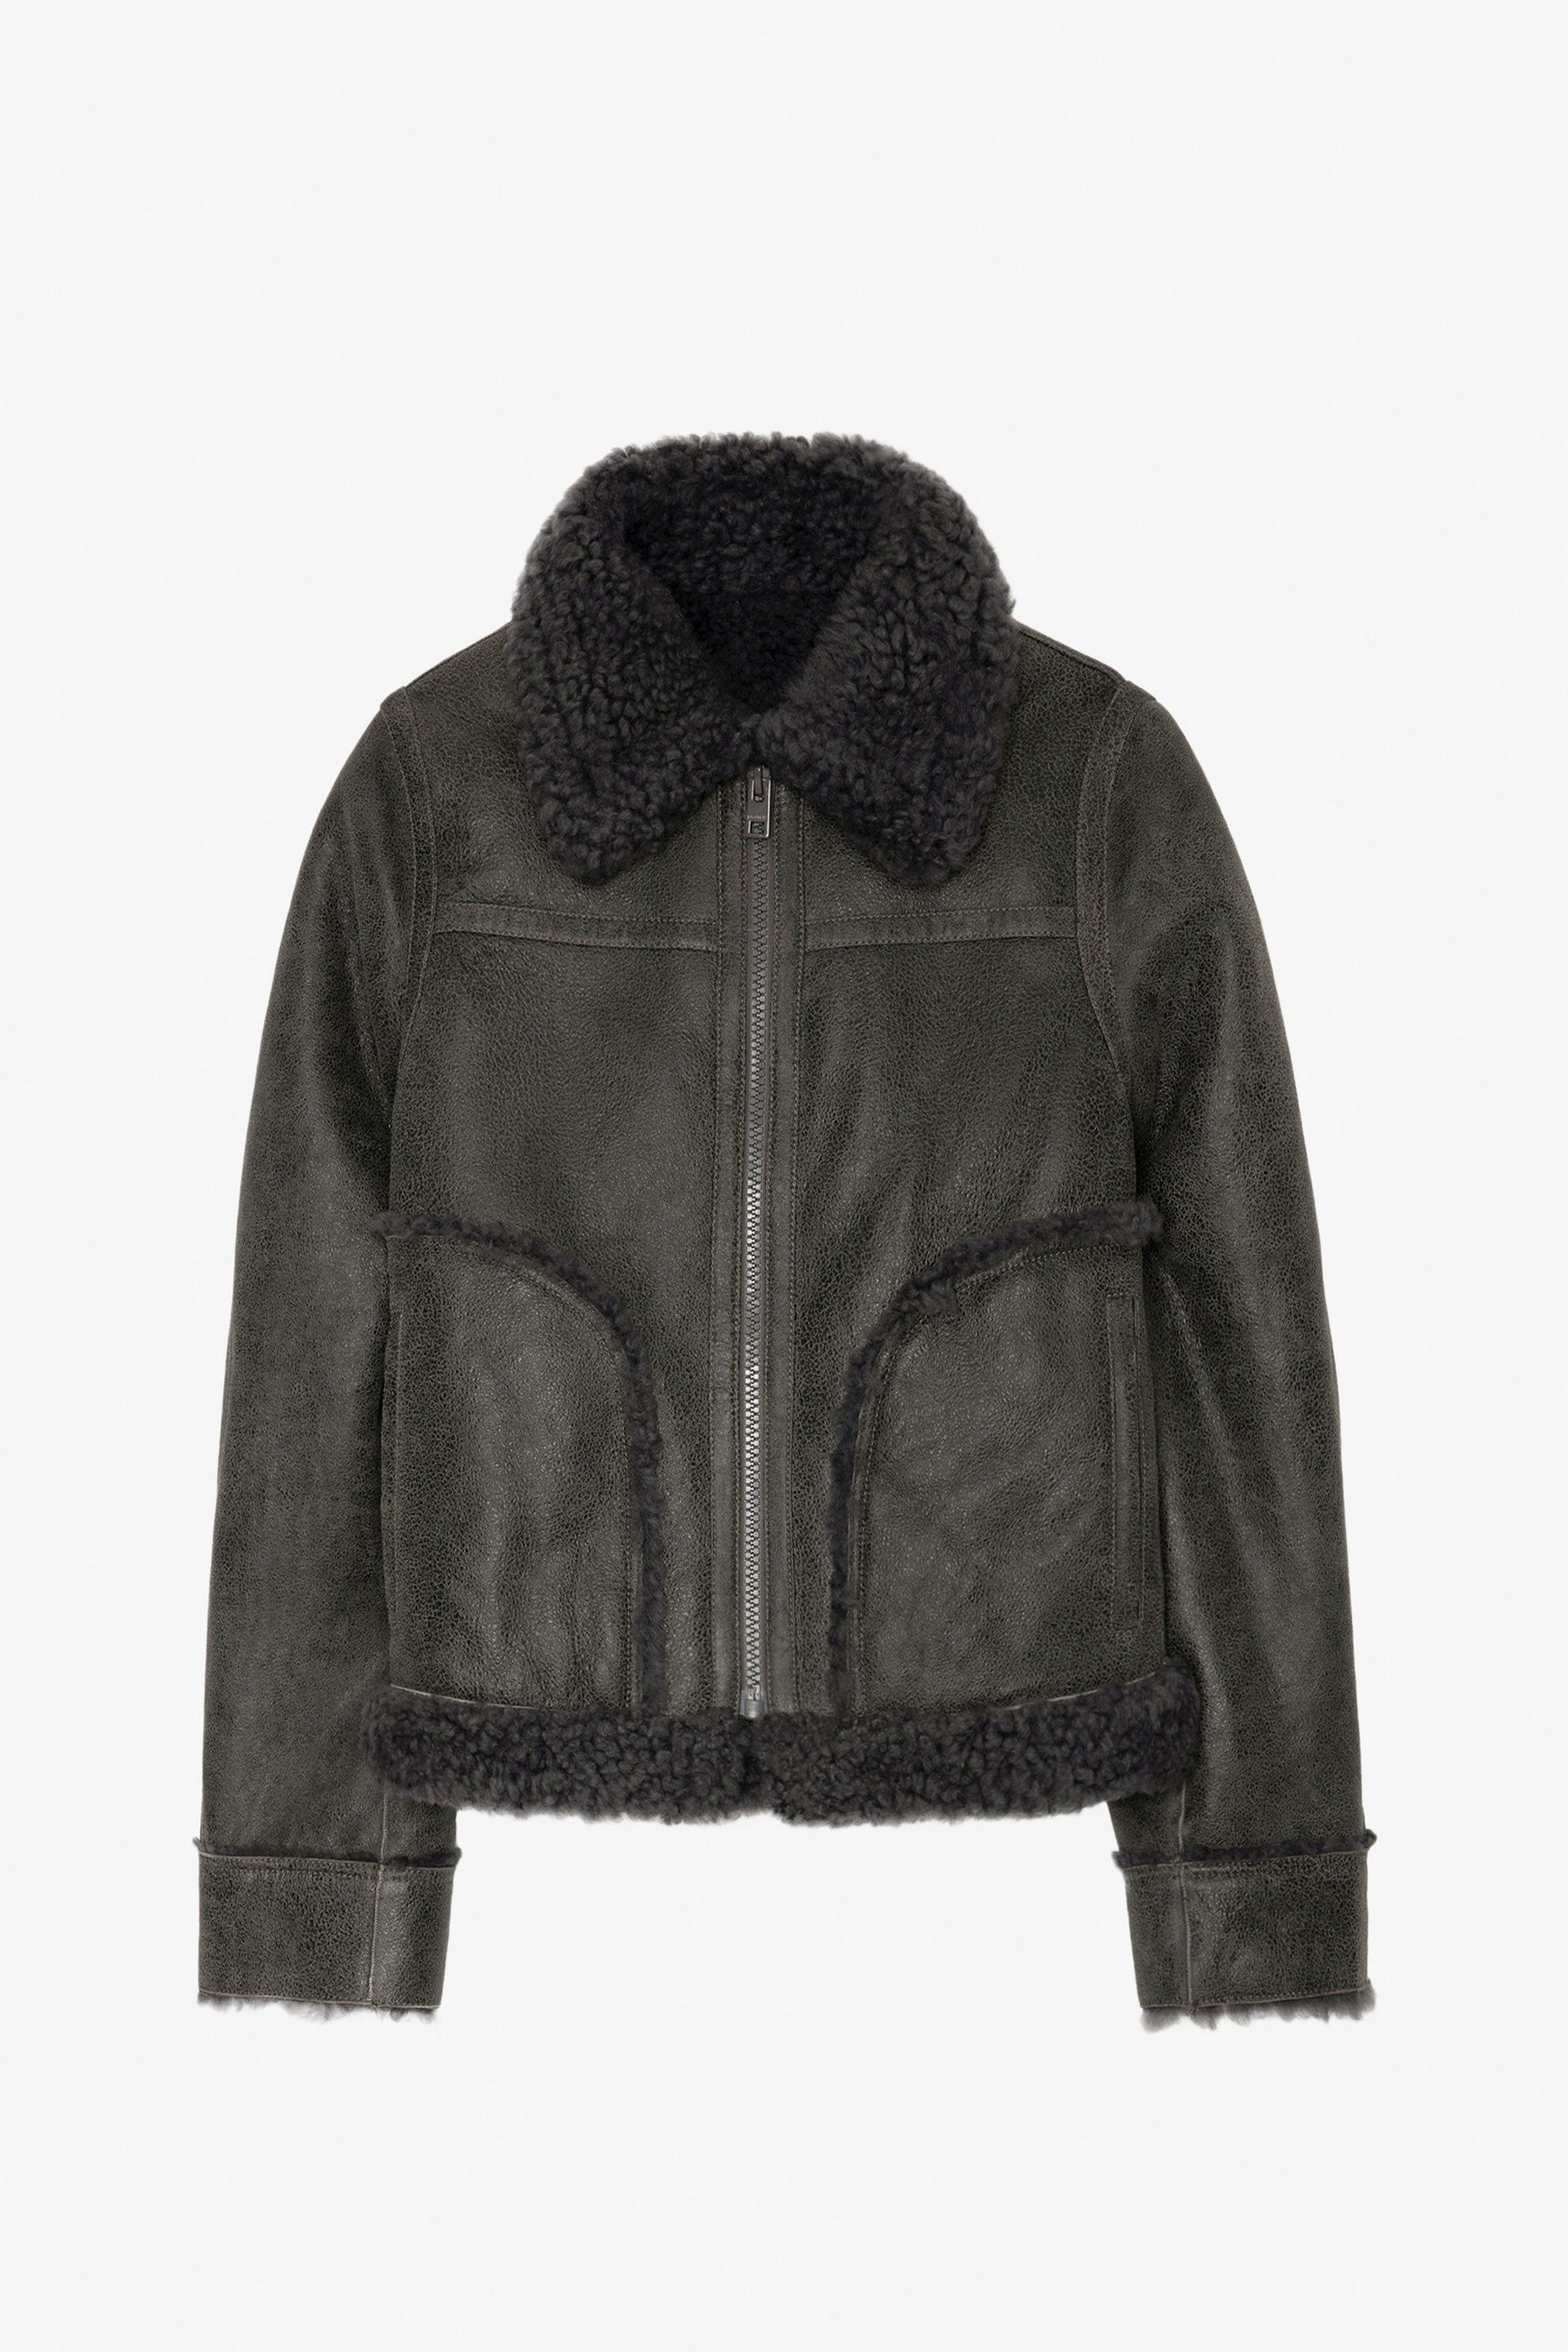 Kady Leather Jacket - Women’s anthracite leather jacket with shearling lining and trim.